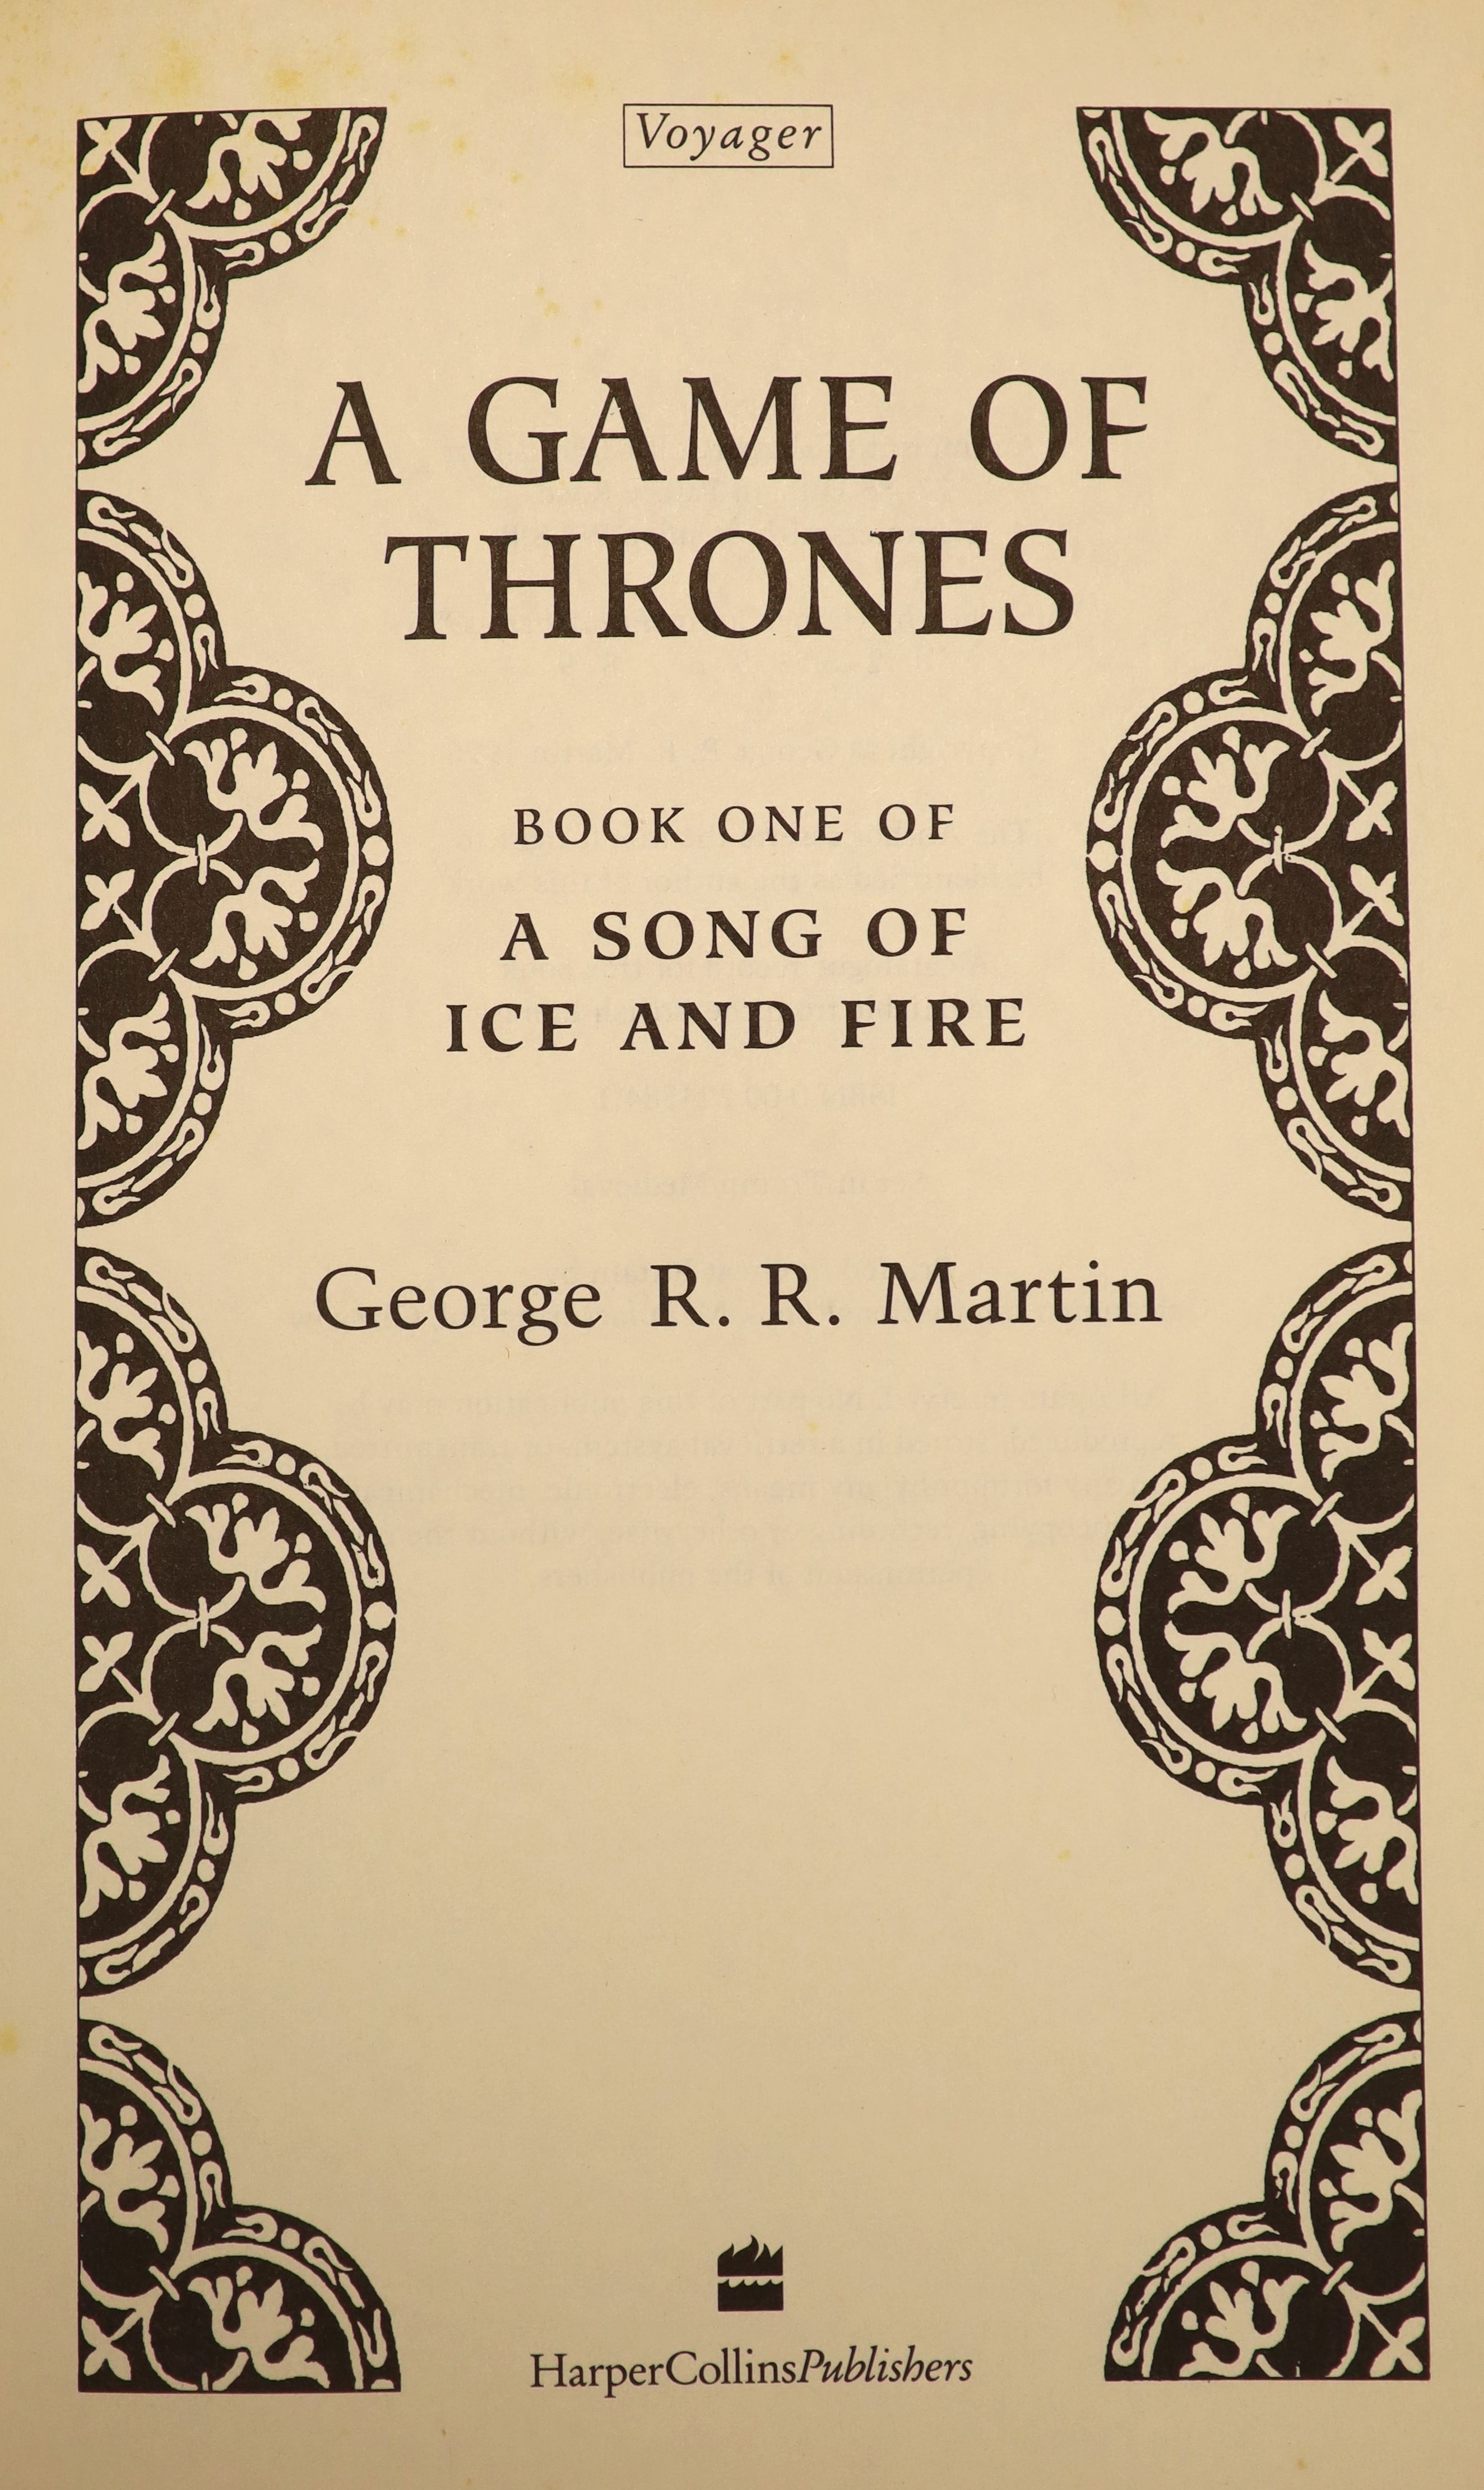 Martin, George R.R. - A Game of Thrones. Book One of a Song of Ice and Fire, 1st edition, original boards, in d/j, Harper Collins, London, 1996